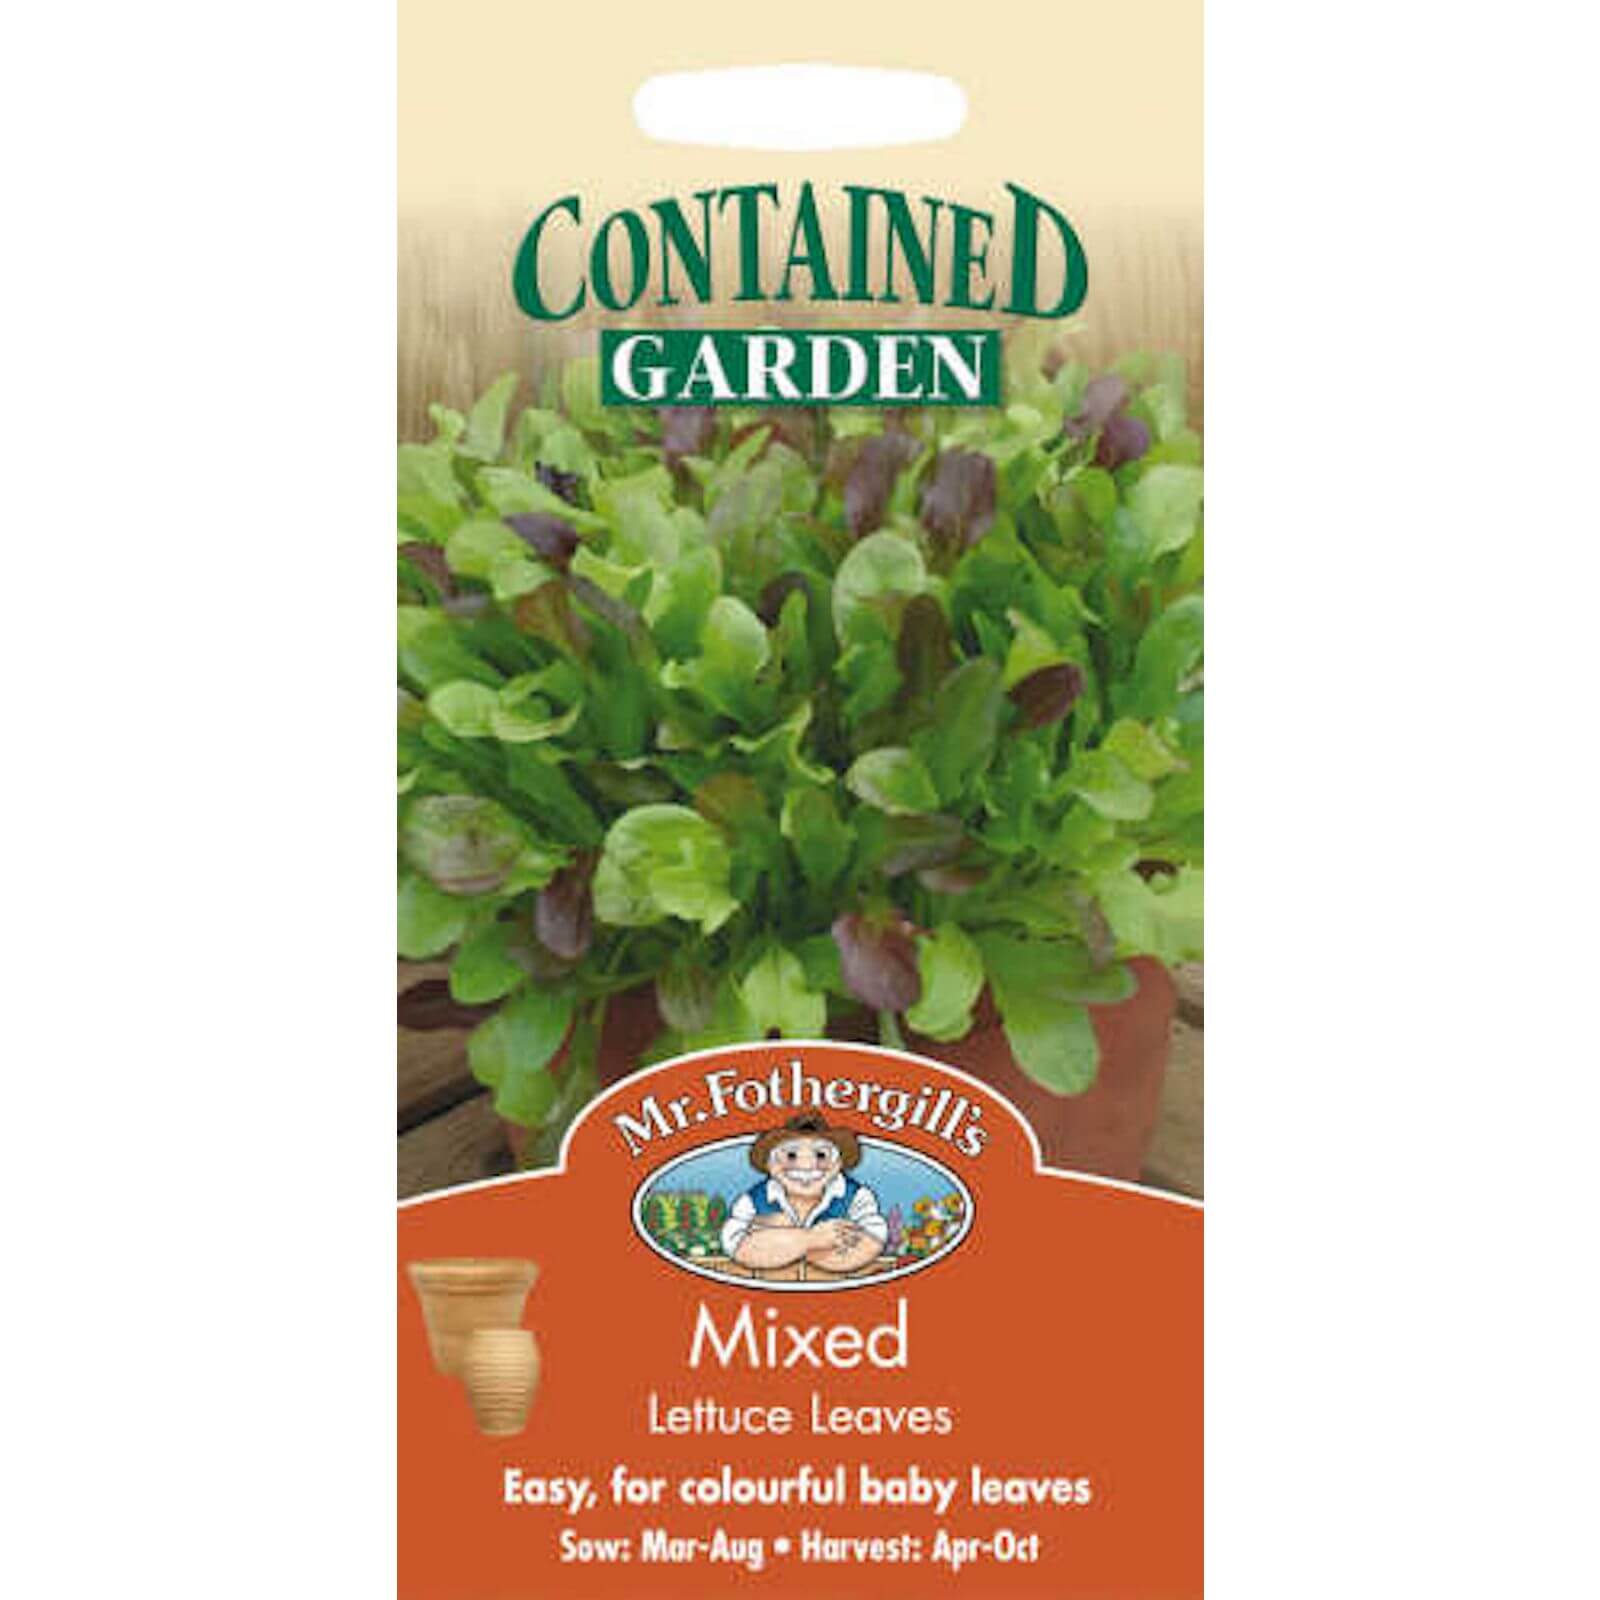 Mr. Fothergill's Mixed Lettuce Leaves (Lactuca Sativa) Seeds